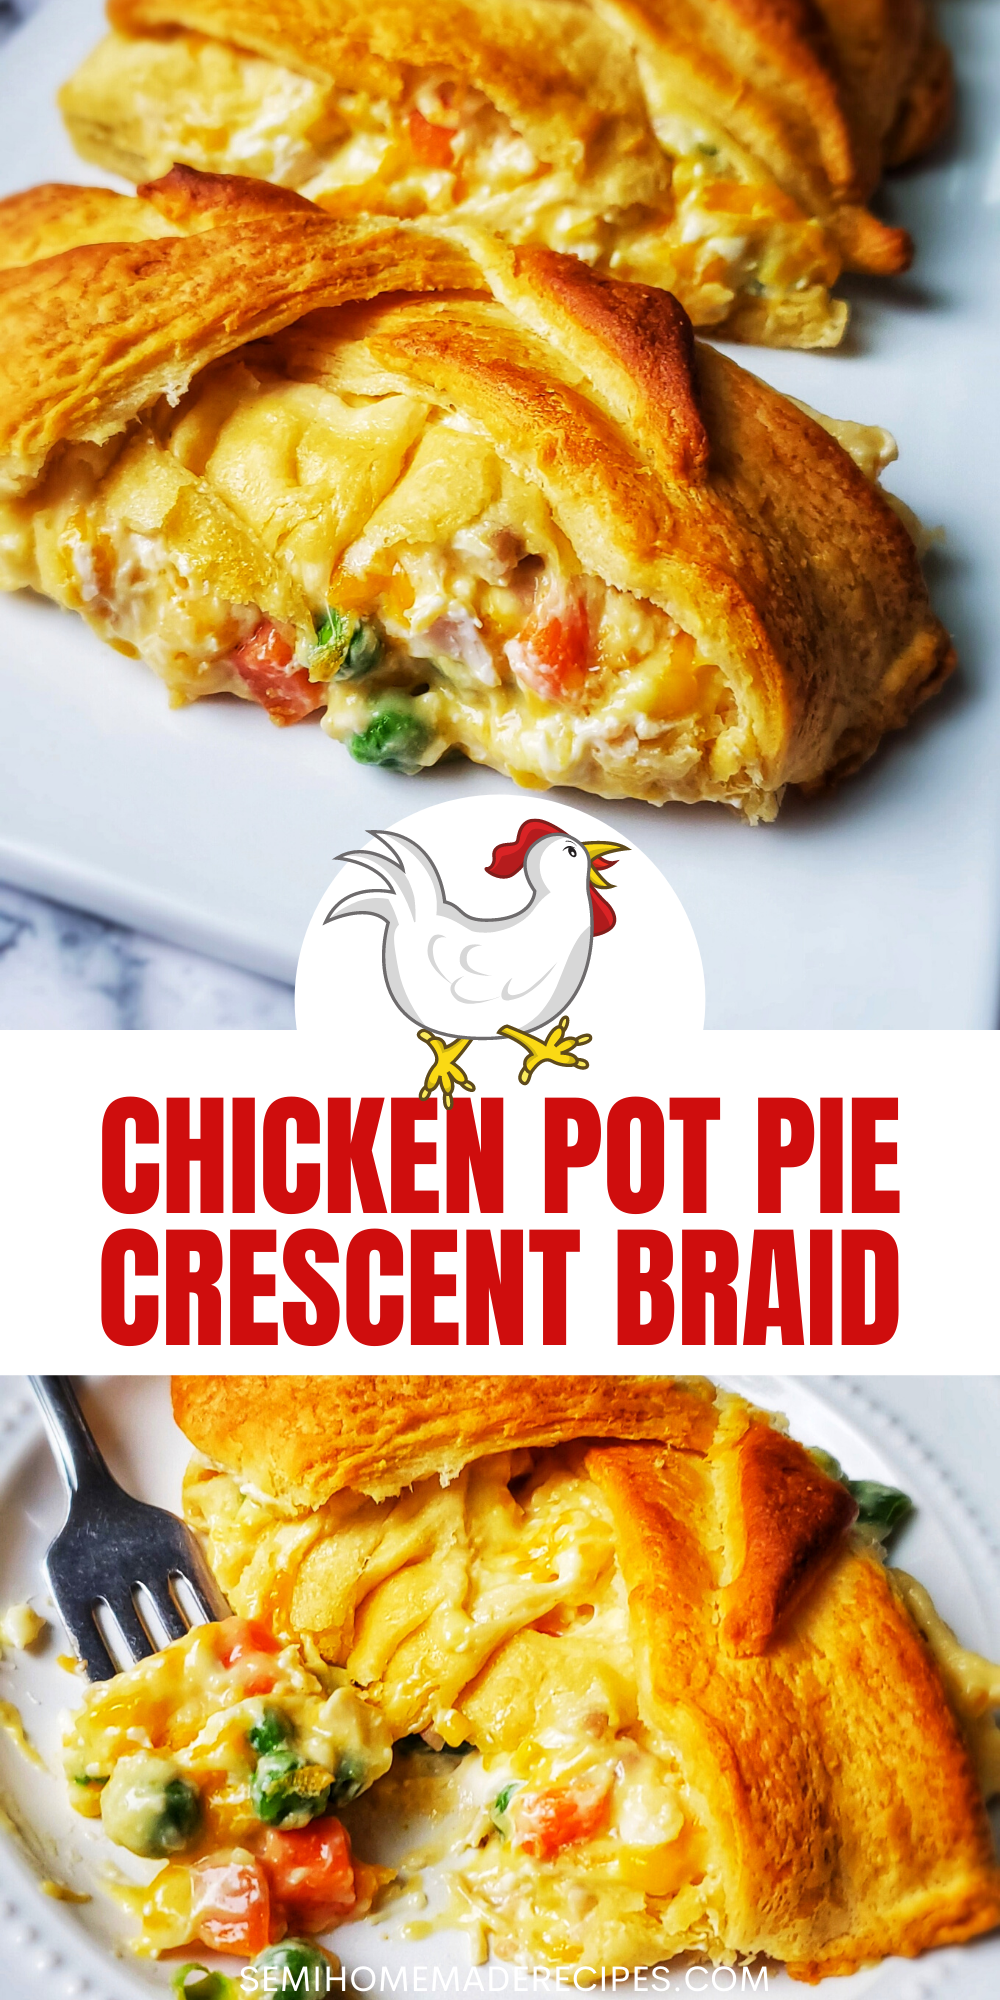 This Chicken Pot Pie Crescent Braid is a super easy dinner recipe that combines crescent rolls, chicken and vegetables!